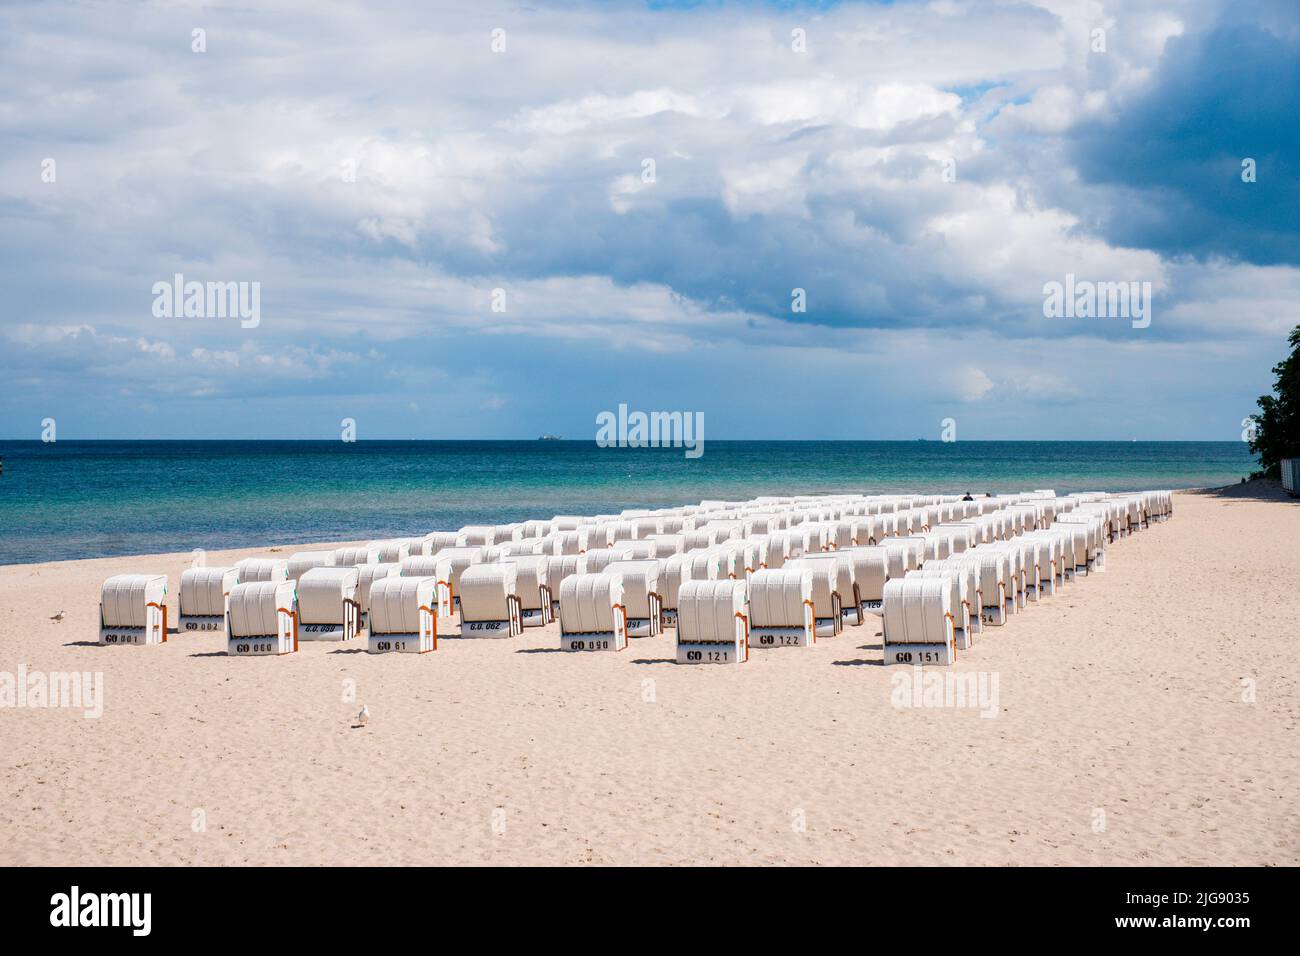 Beach chairs lined up side by side on the beach of the Baltic Sea Stock Photo